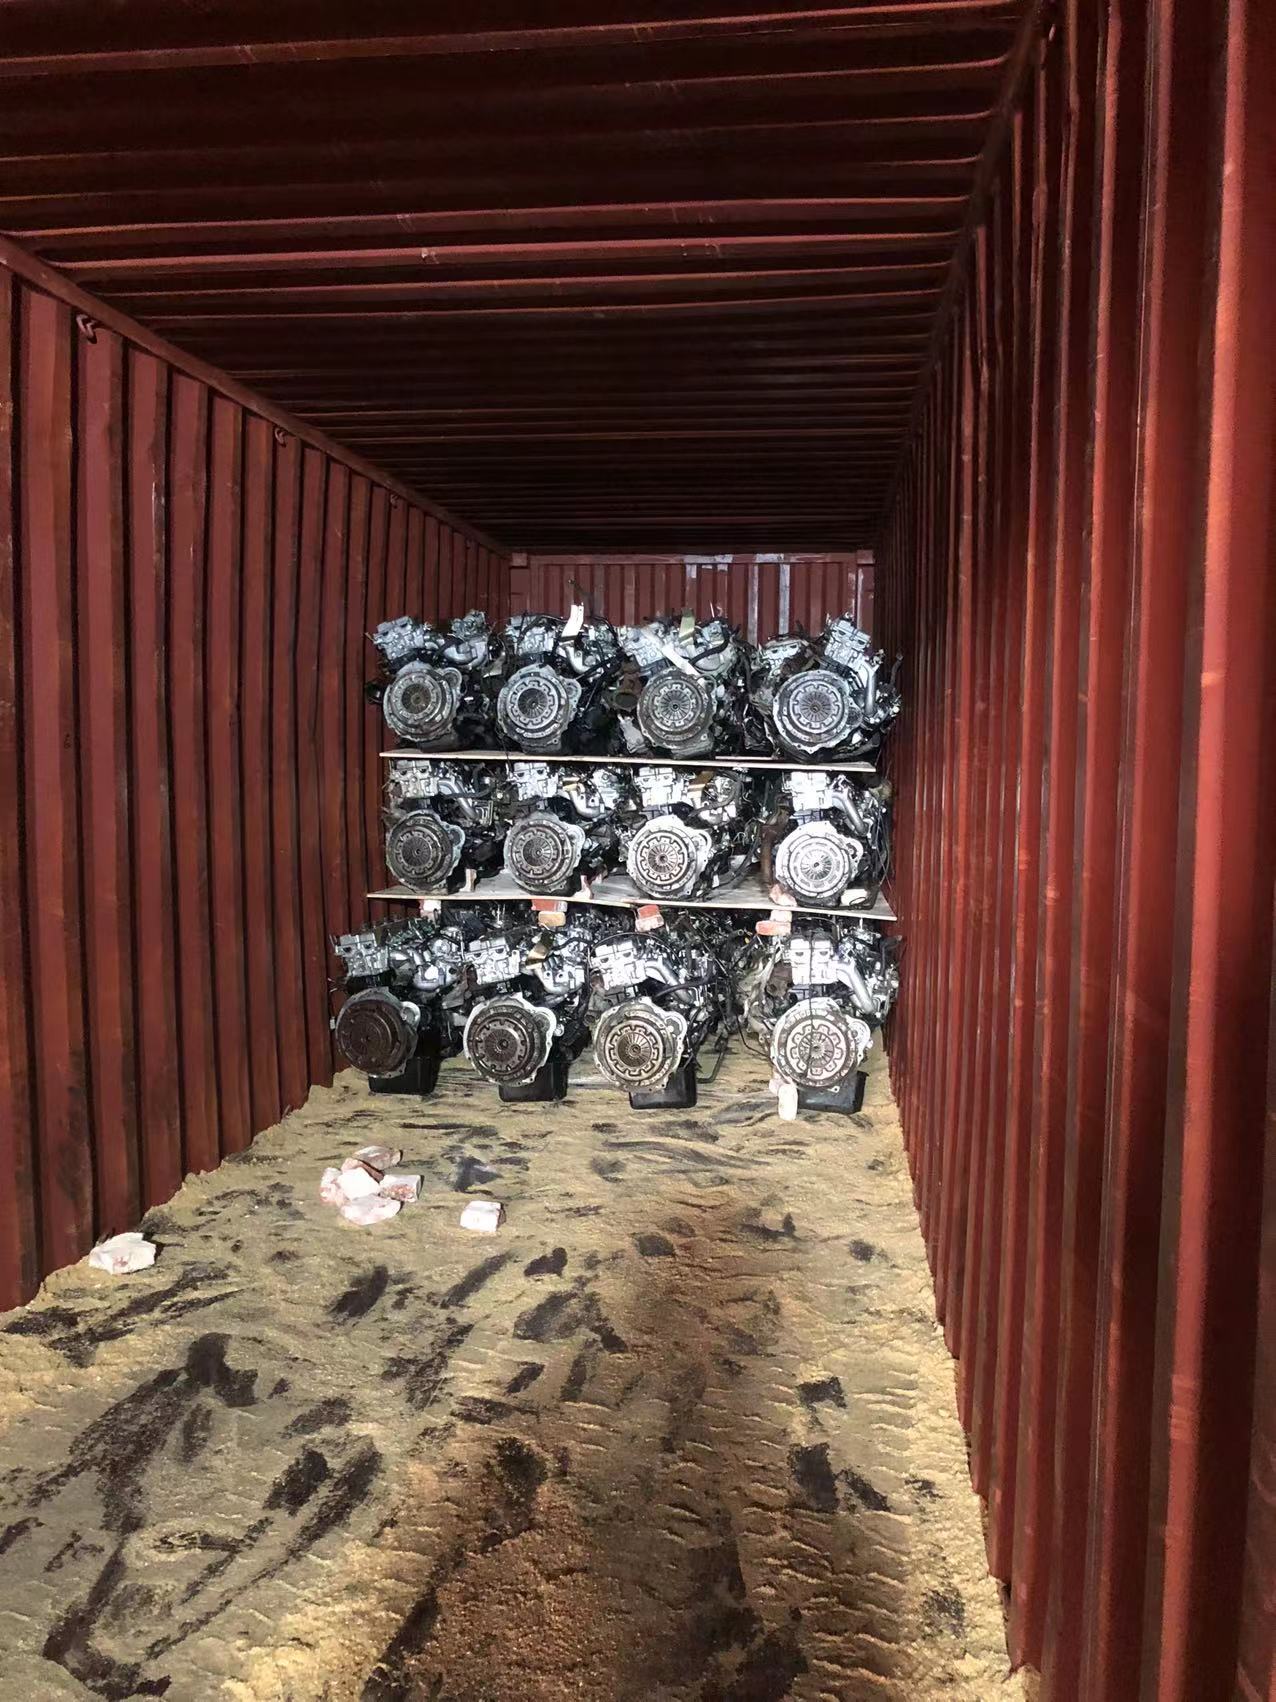 KA24 2.4L engine gasoline fuel xtrail engine load container to Mexico (图3)